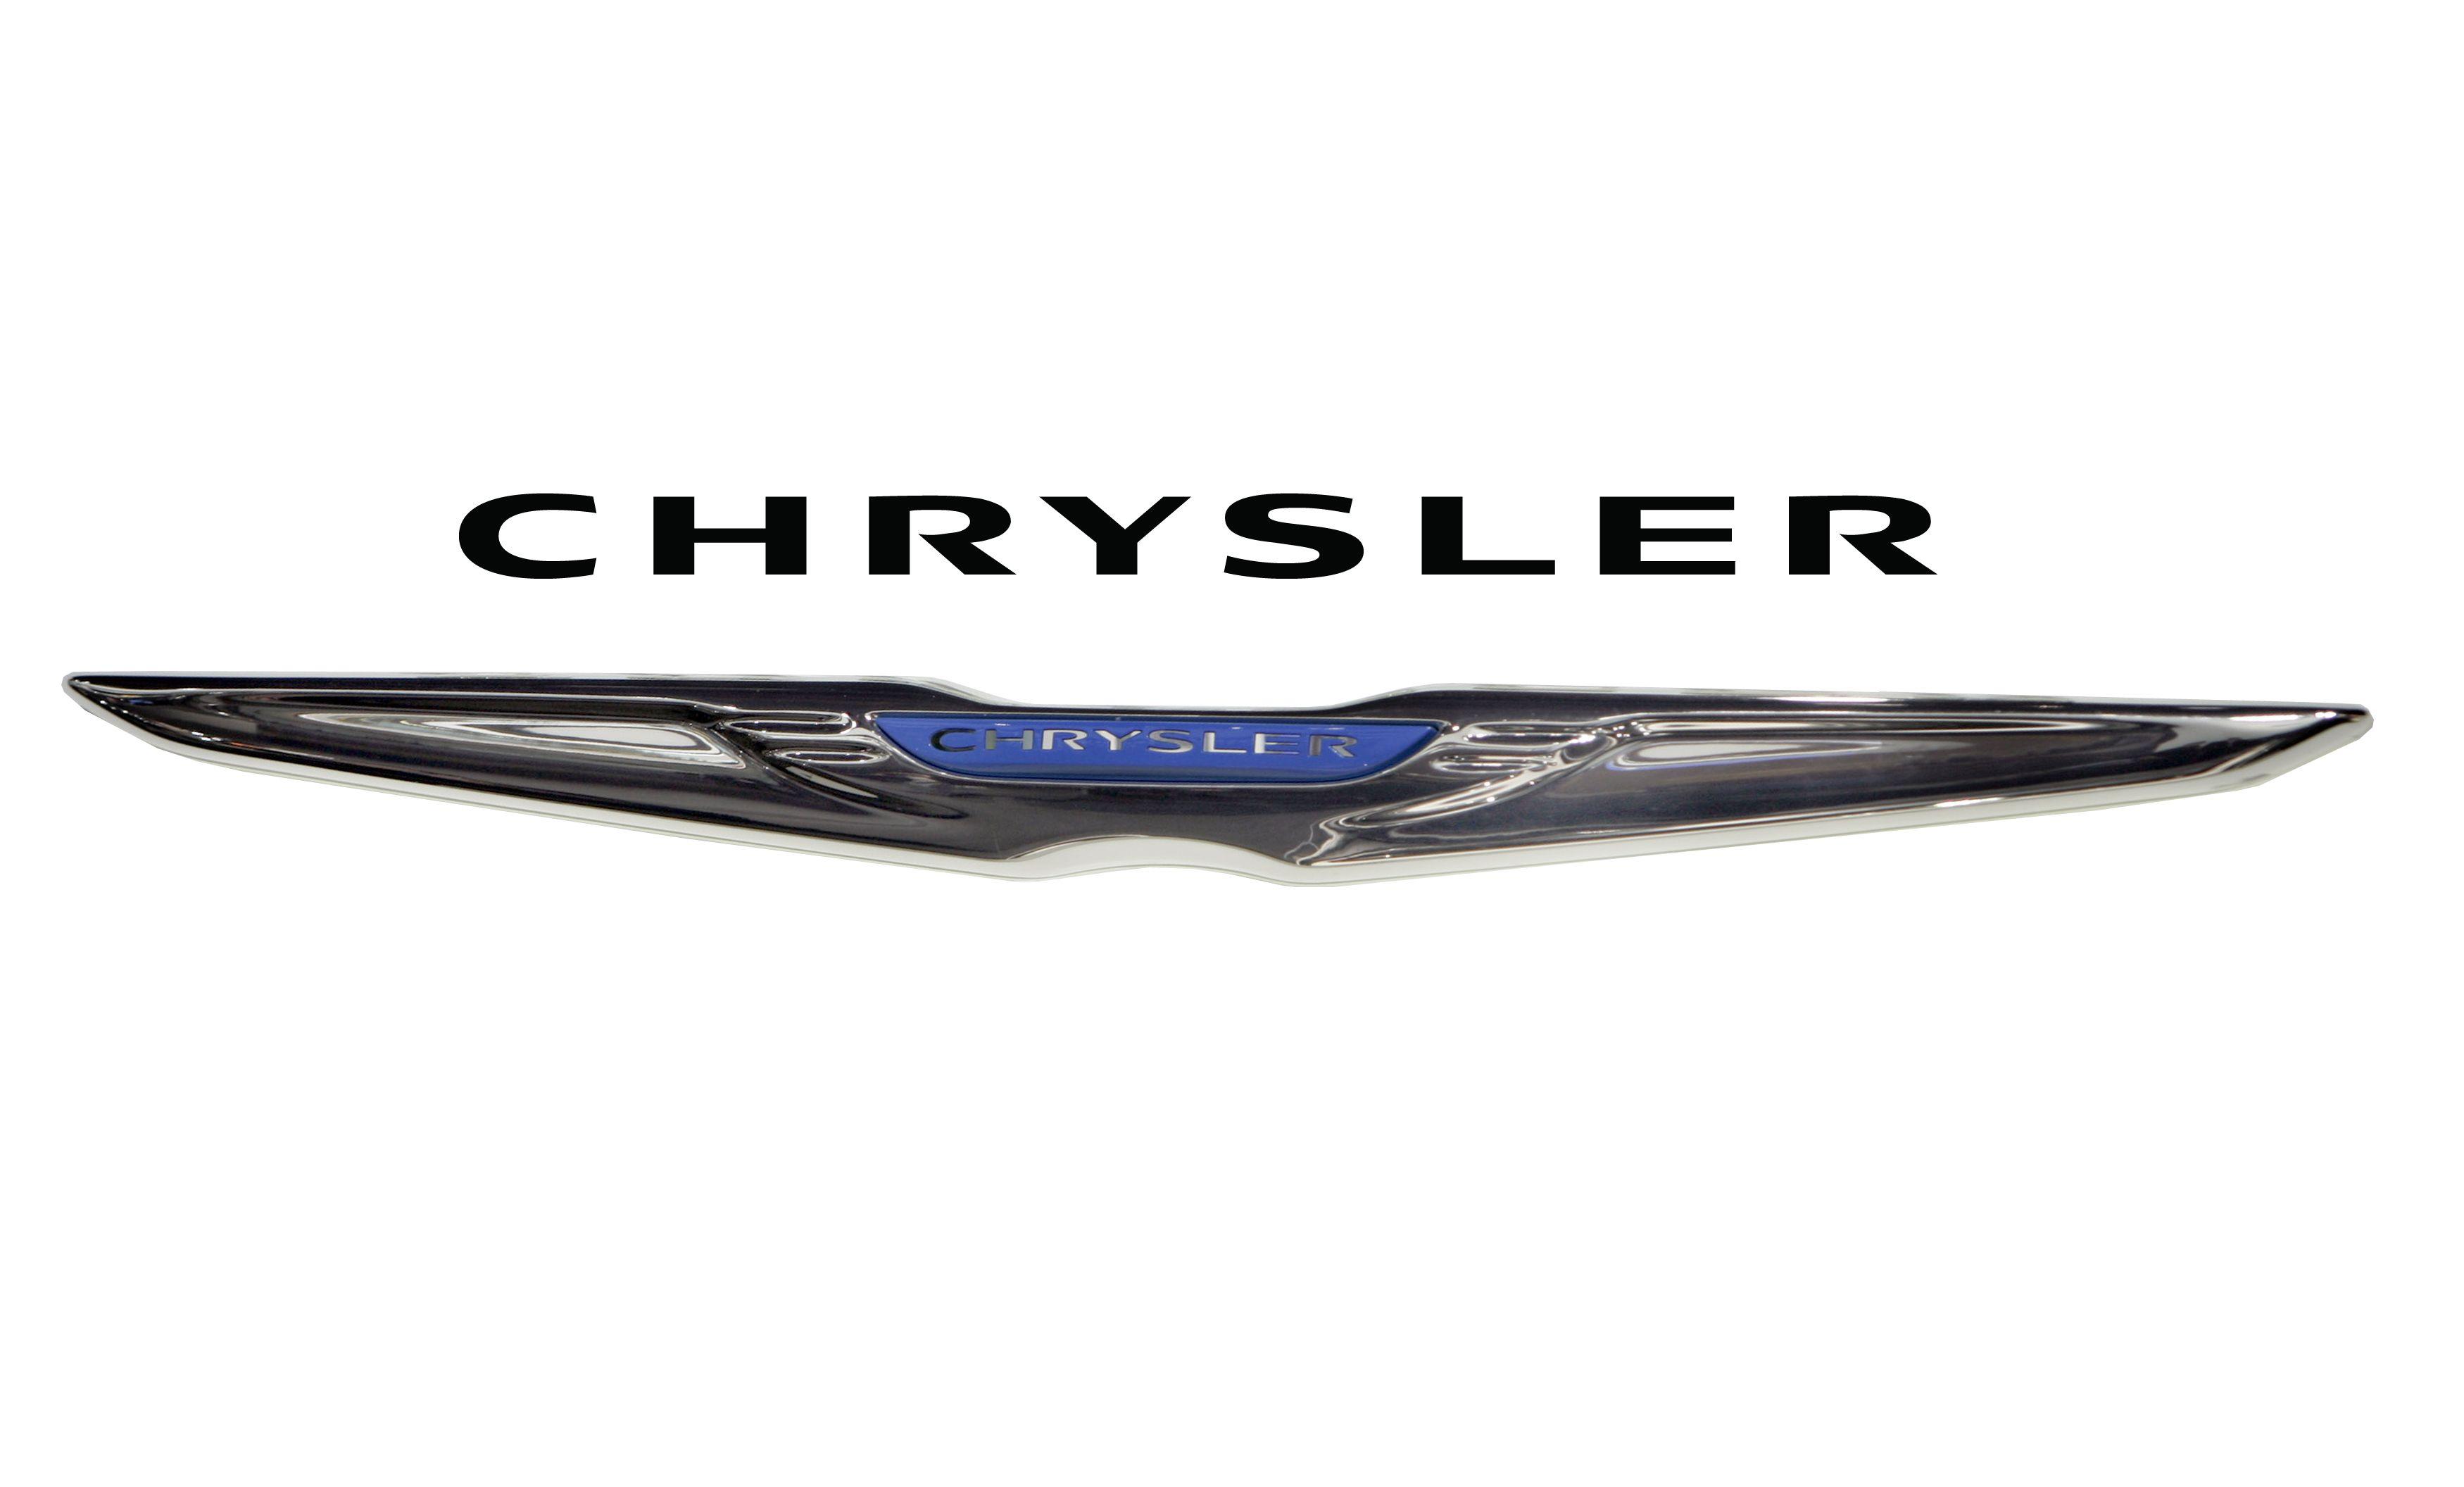 Old Chrysler Logo - Chrysler Logo, Chrysler Car Symbol Meaning and History. Car Brand